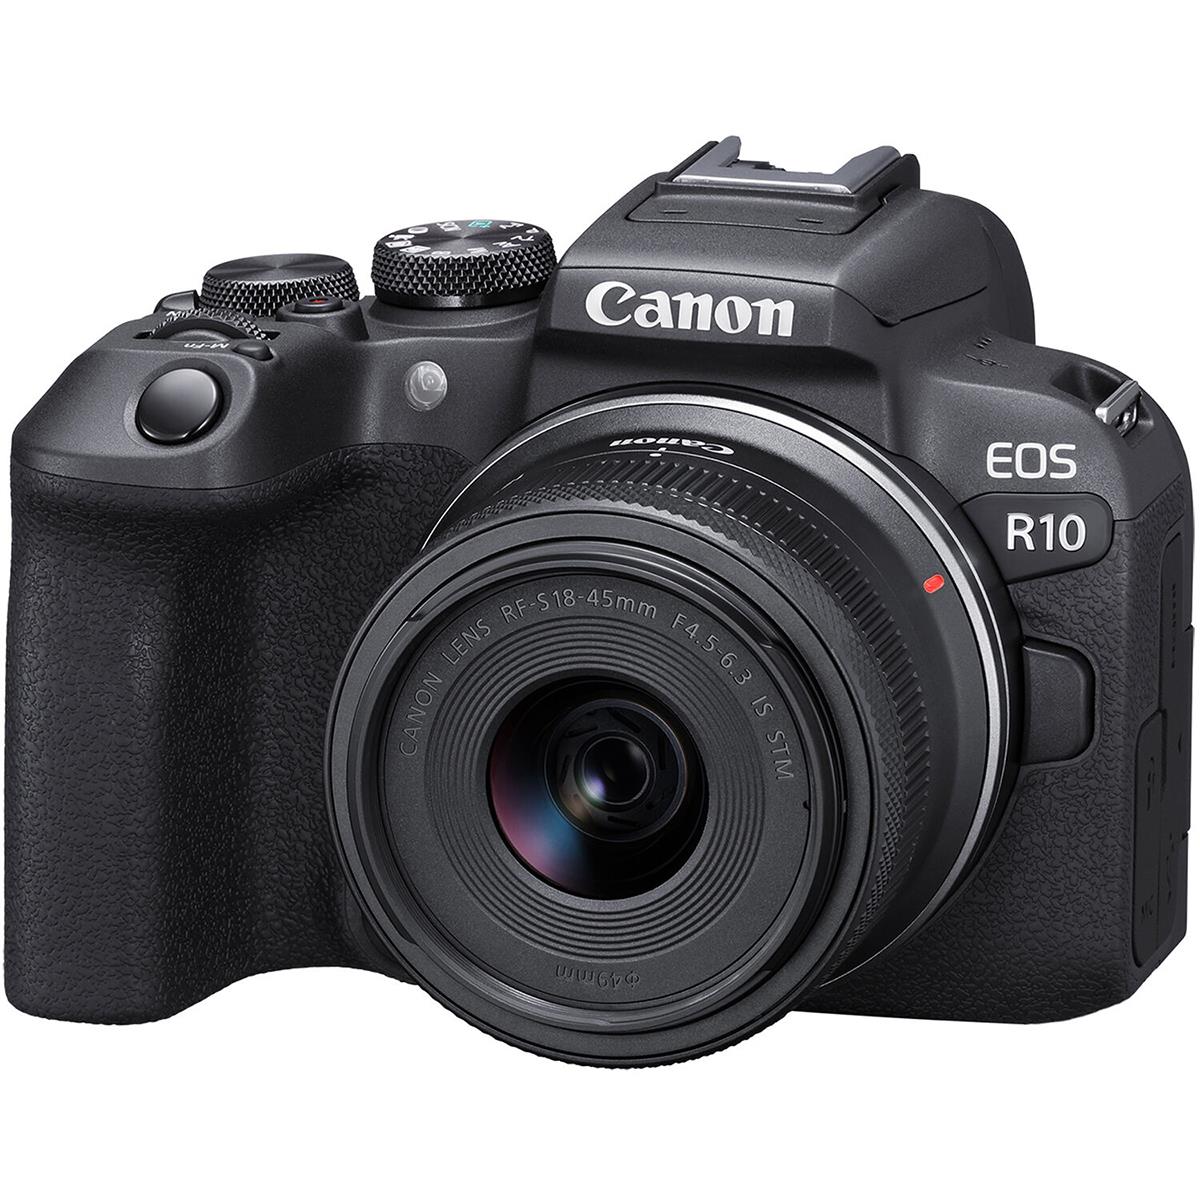 Image of Canon EOS R10 Mirrorless Digital Camera with RF-S 18-45mm f/4.5-6.3 IS STM Lens